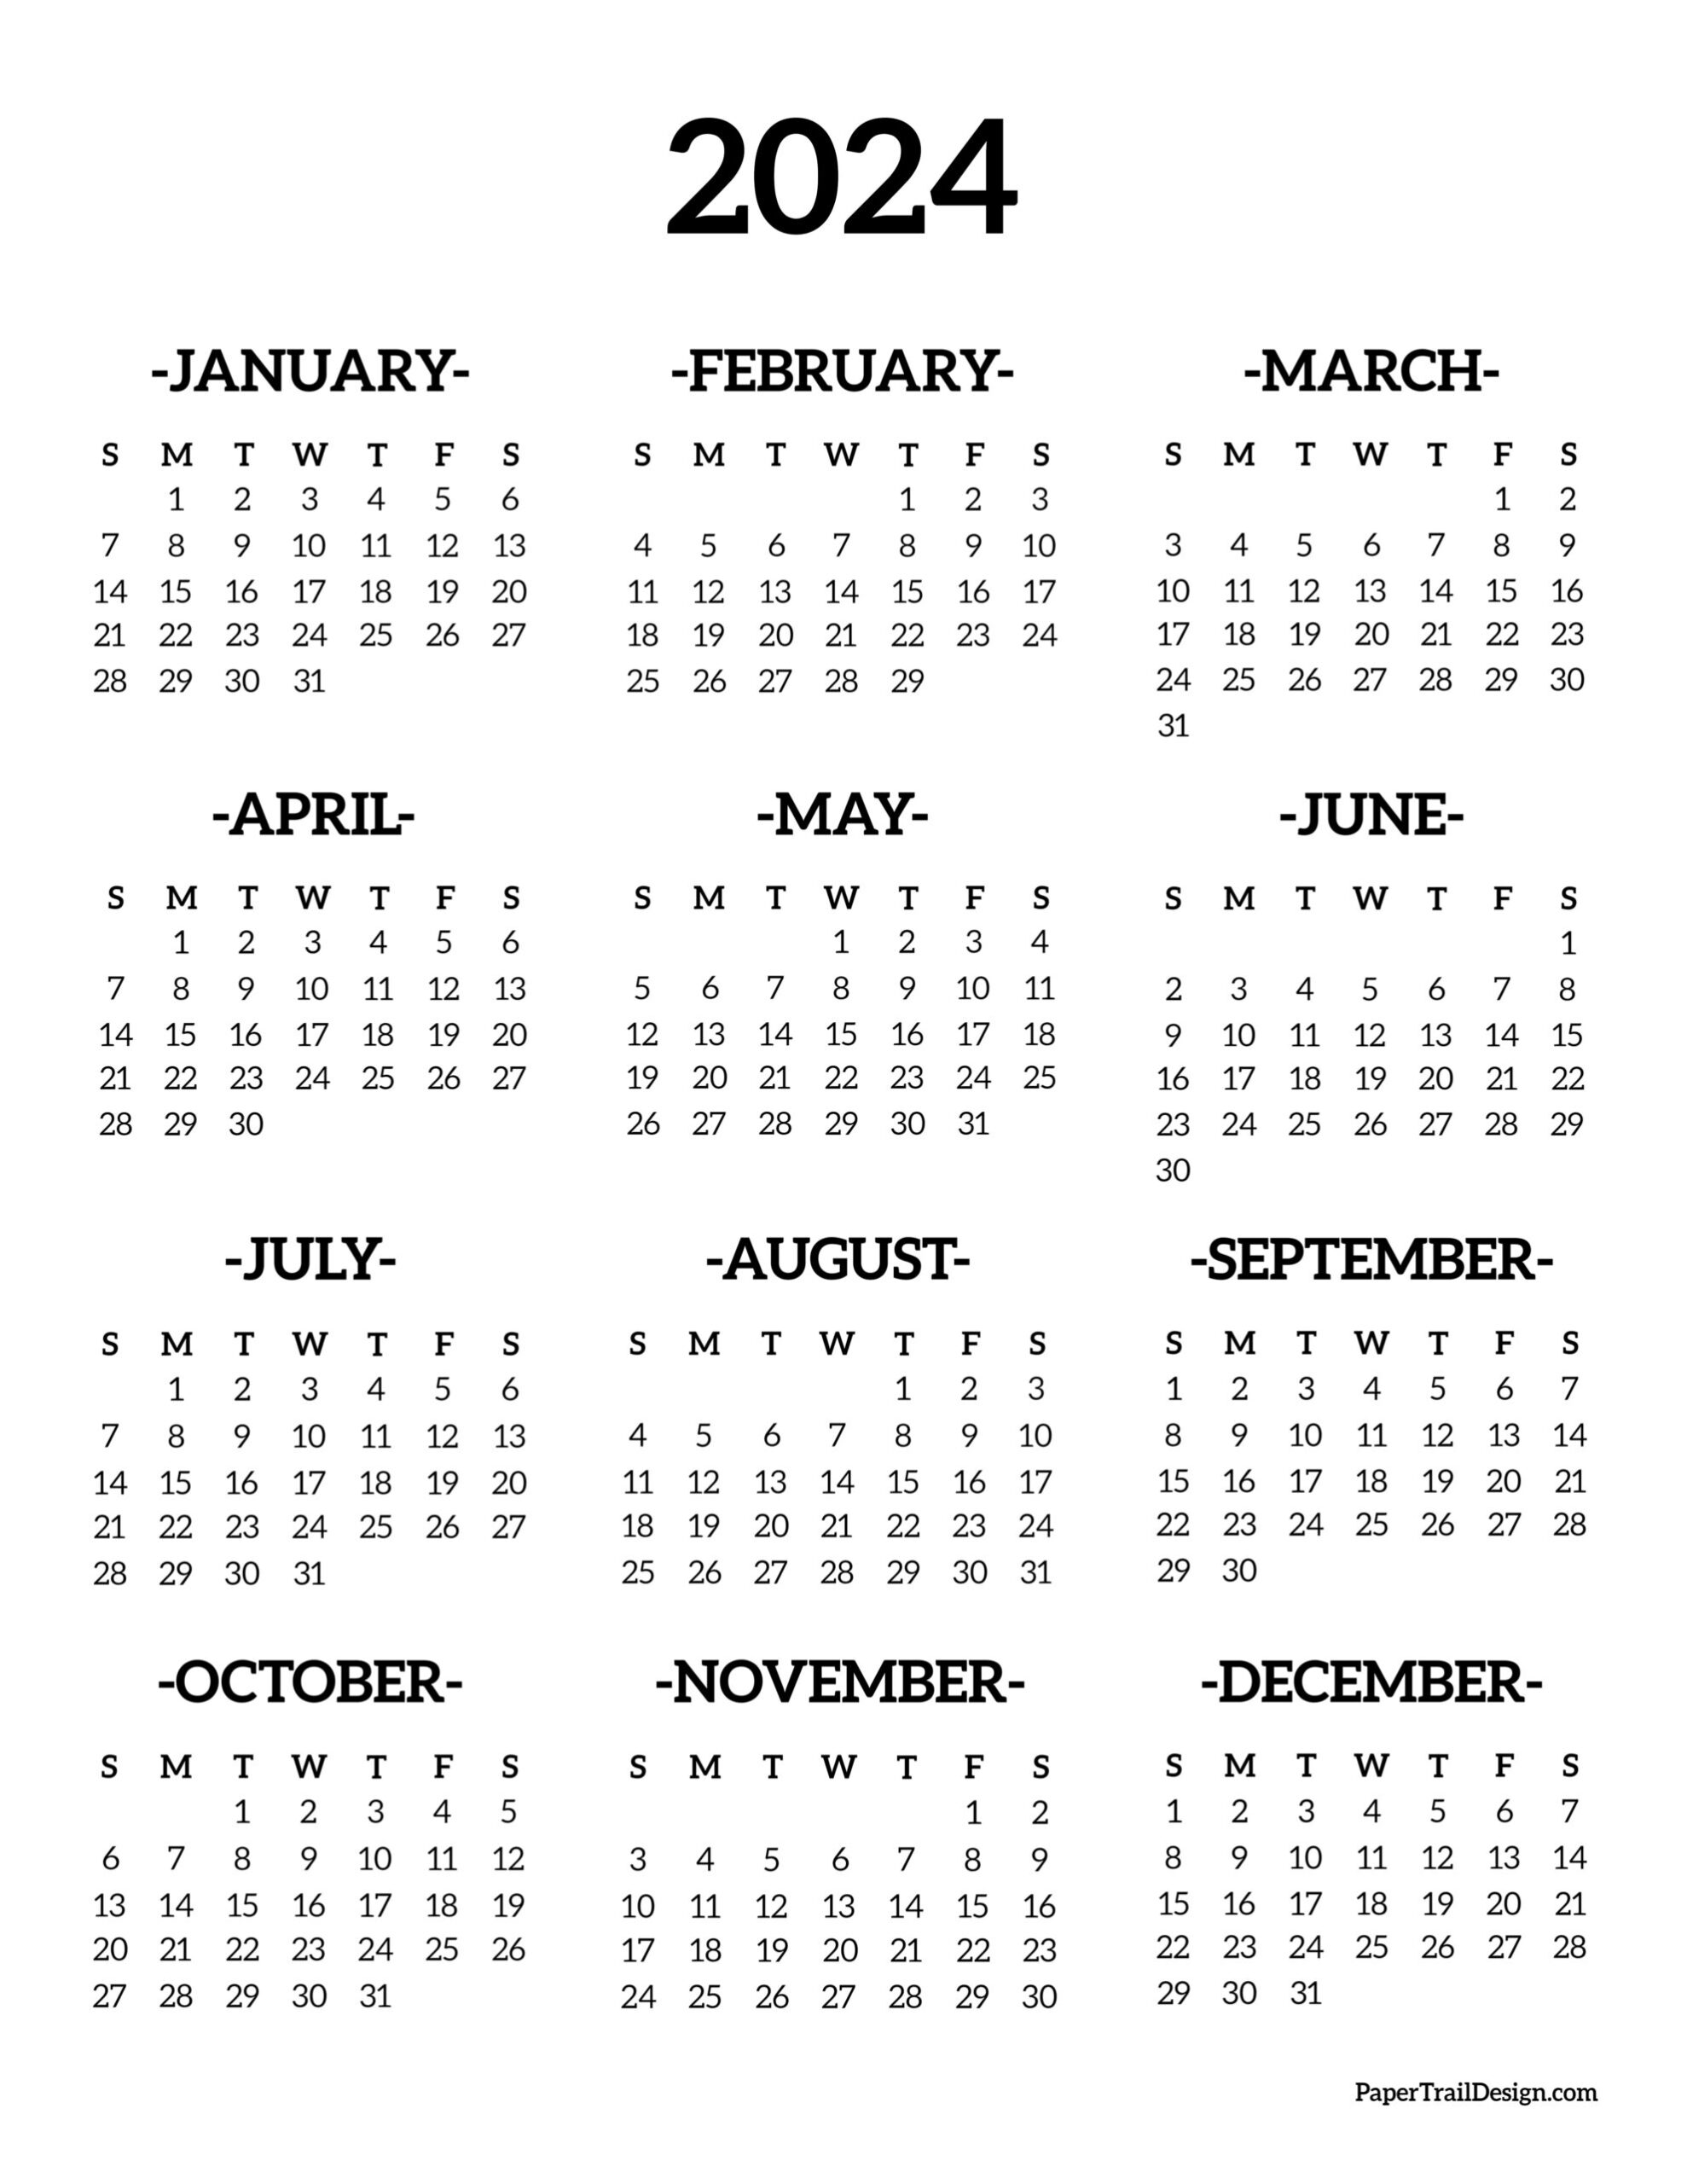 Calendar 2024 Printable One Page - Paper Trail Design for Free Printable One Page Calendar 2024